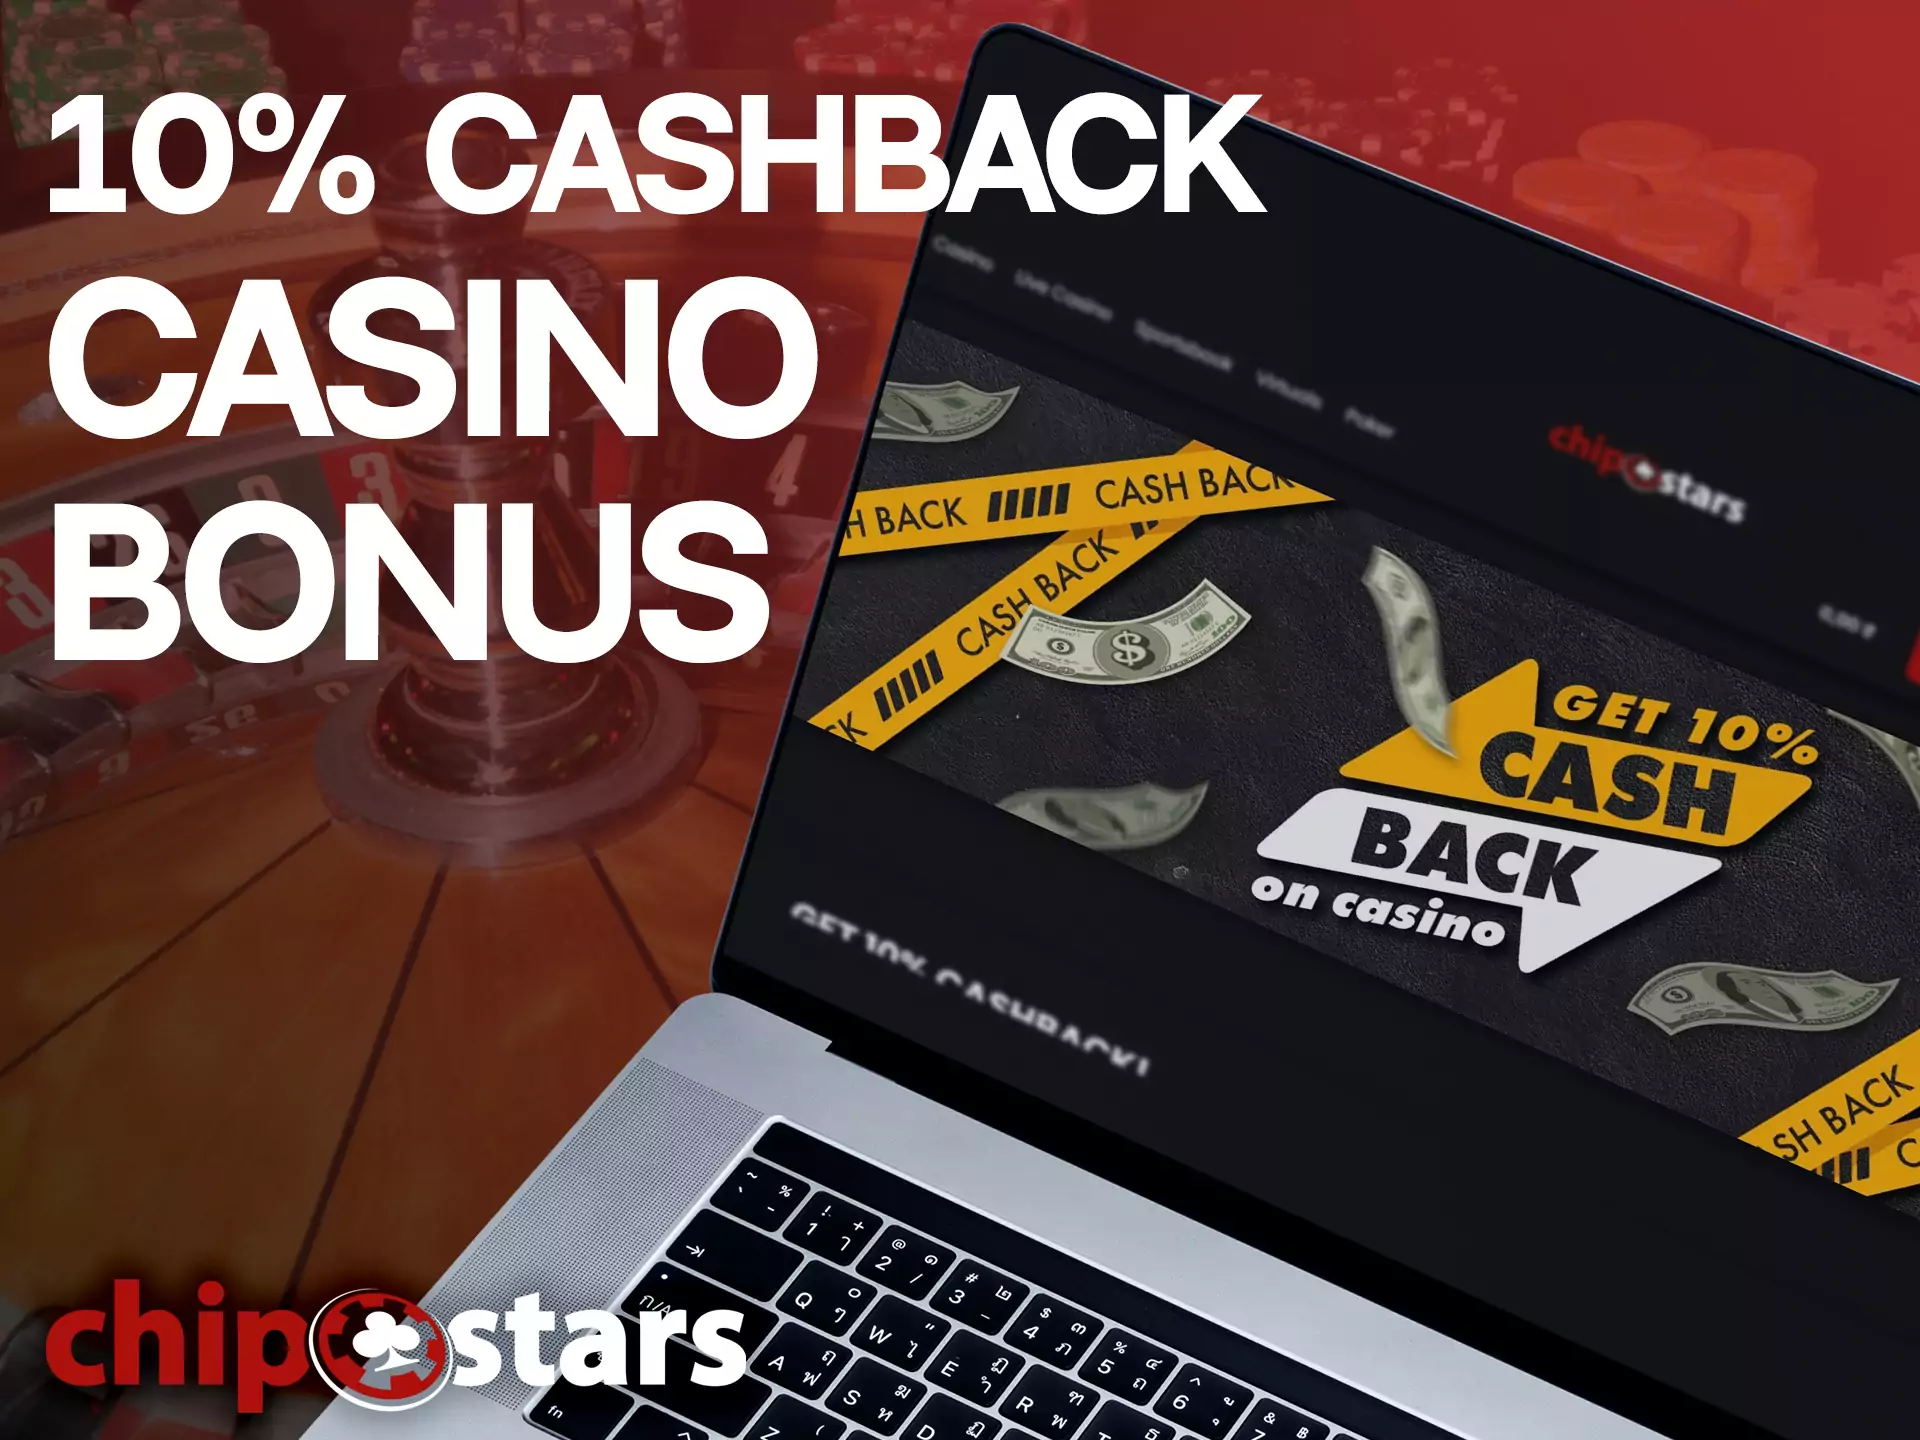 By playing casino games, you can get a 10% cashback on your account.